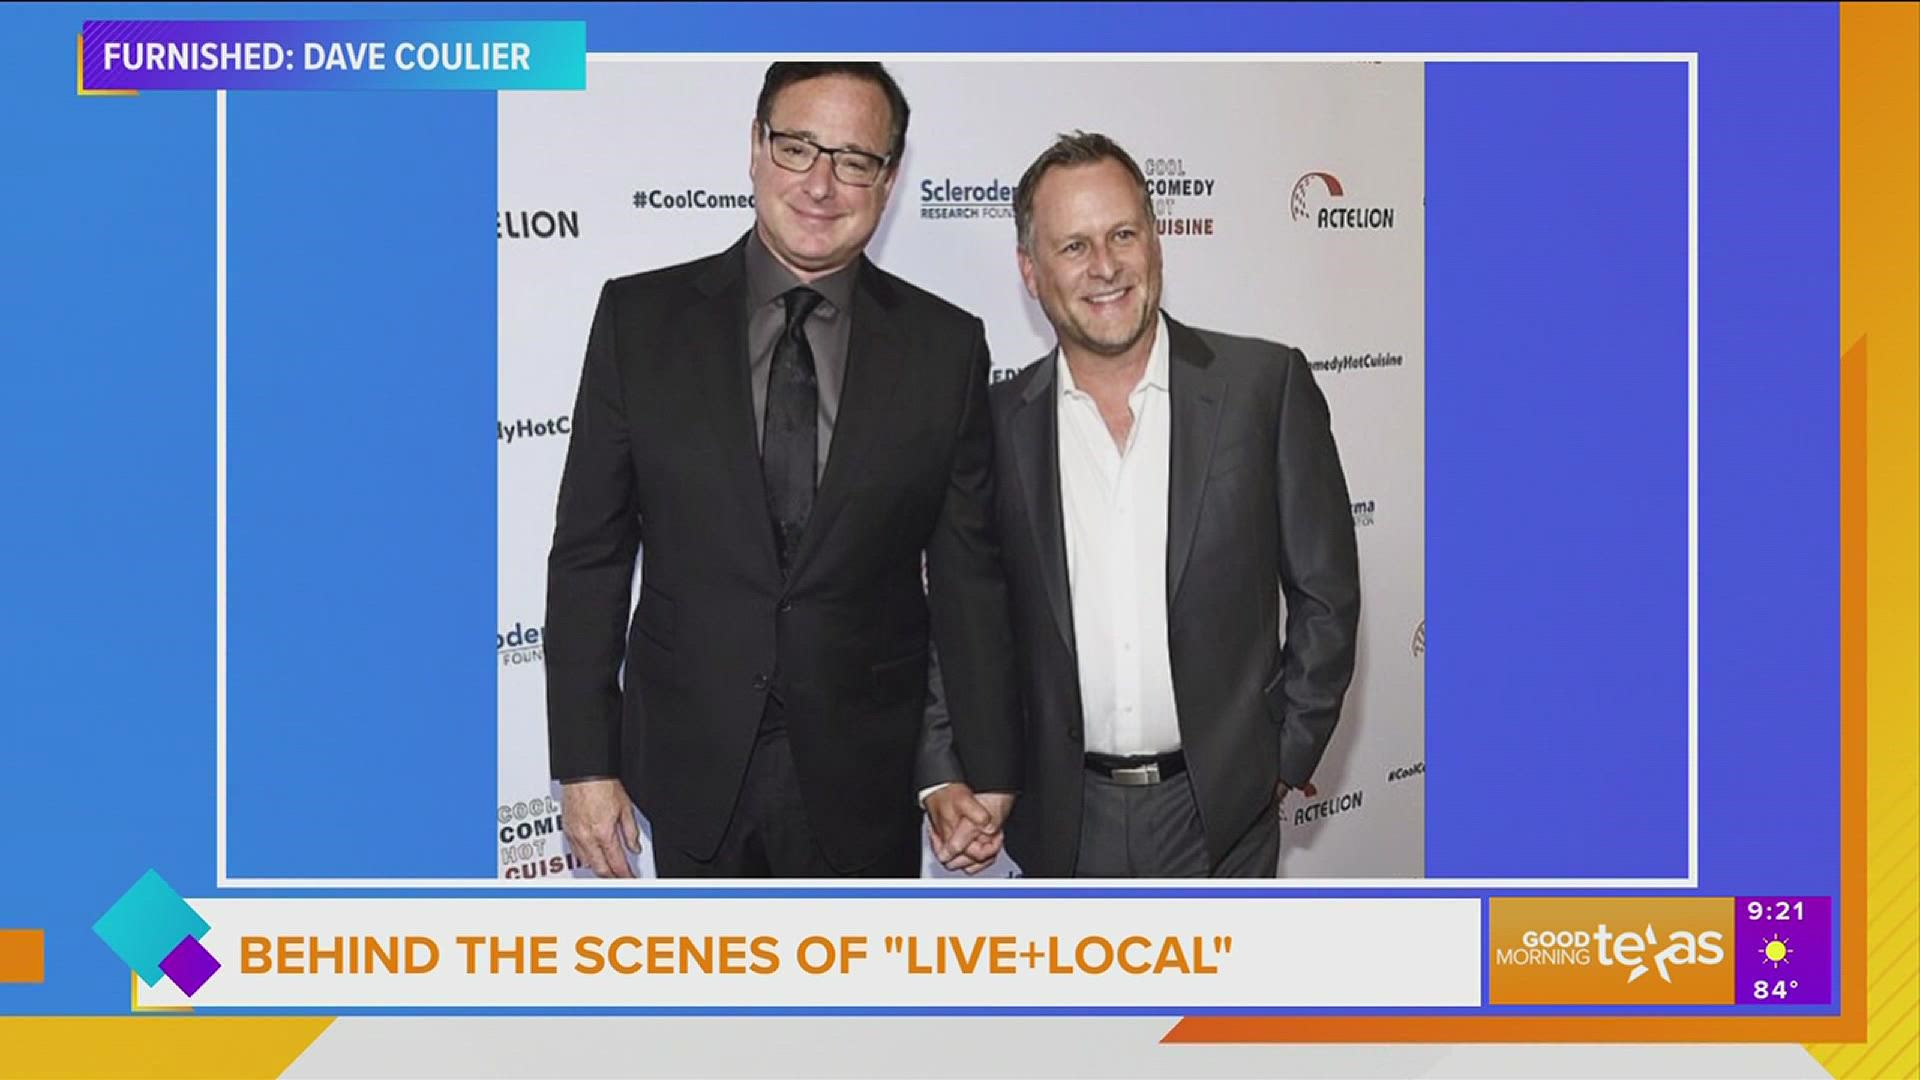 Best known as "Uncle Joey" from full house – actor and comedian Davie Coulier shares all about his new show and his fondest memories of his late friend Bob Saget.